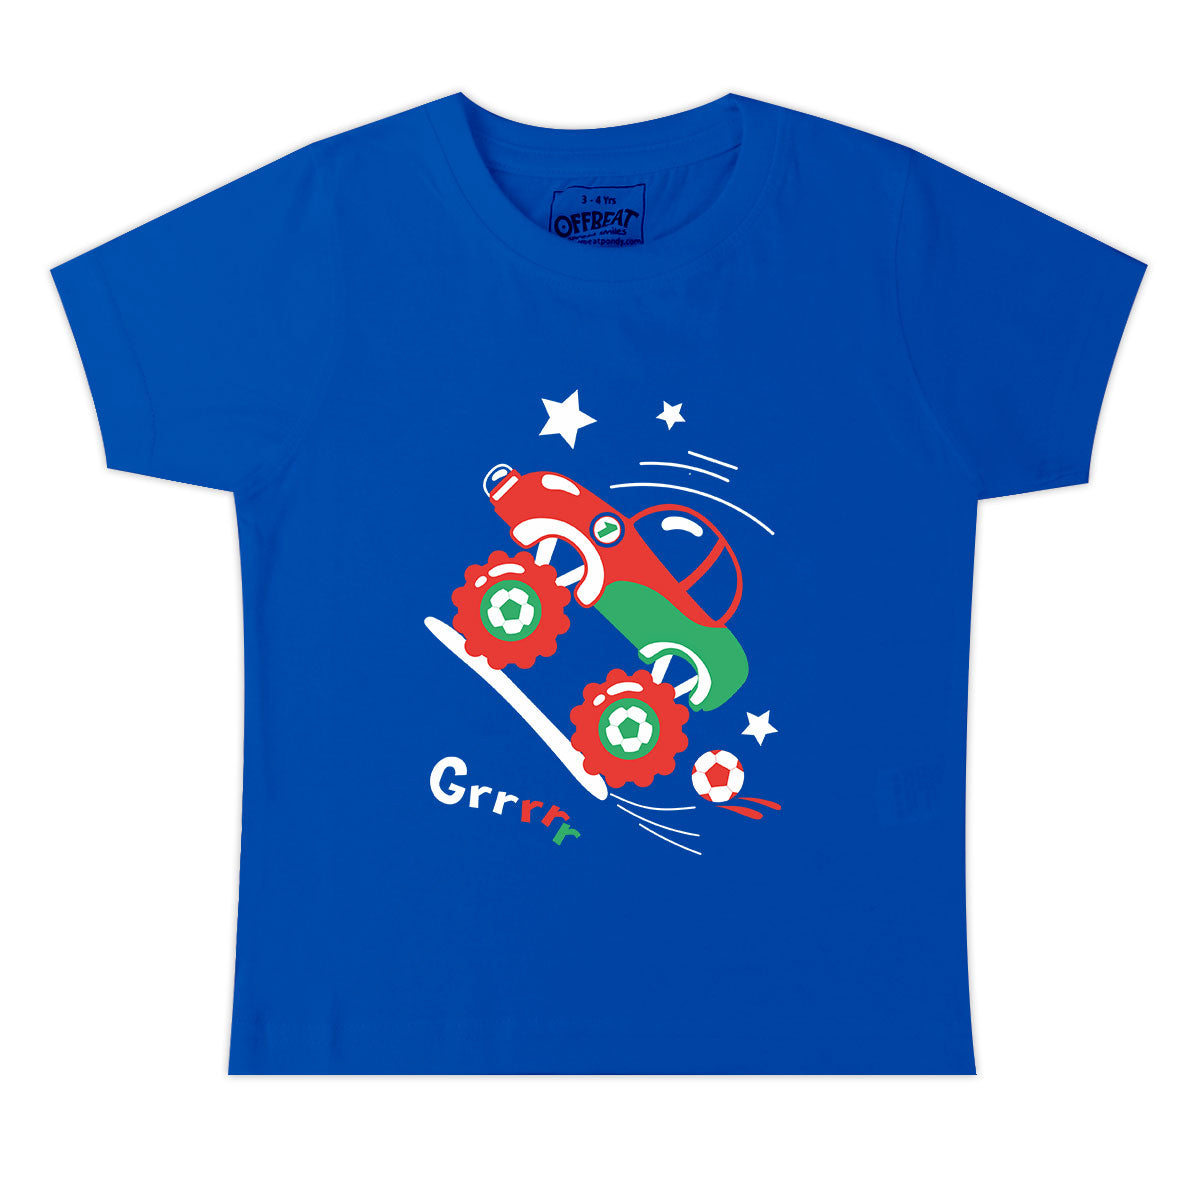 Dirt Racing - Premium Round Neck Cotton Tees for Kids - Electric Blue